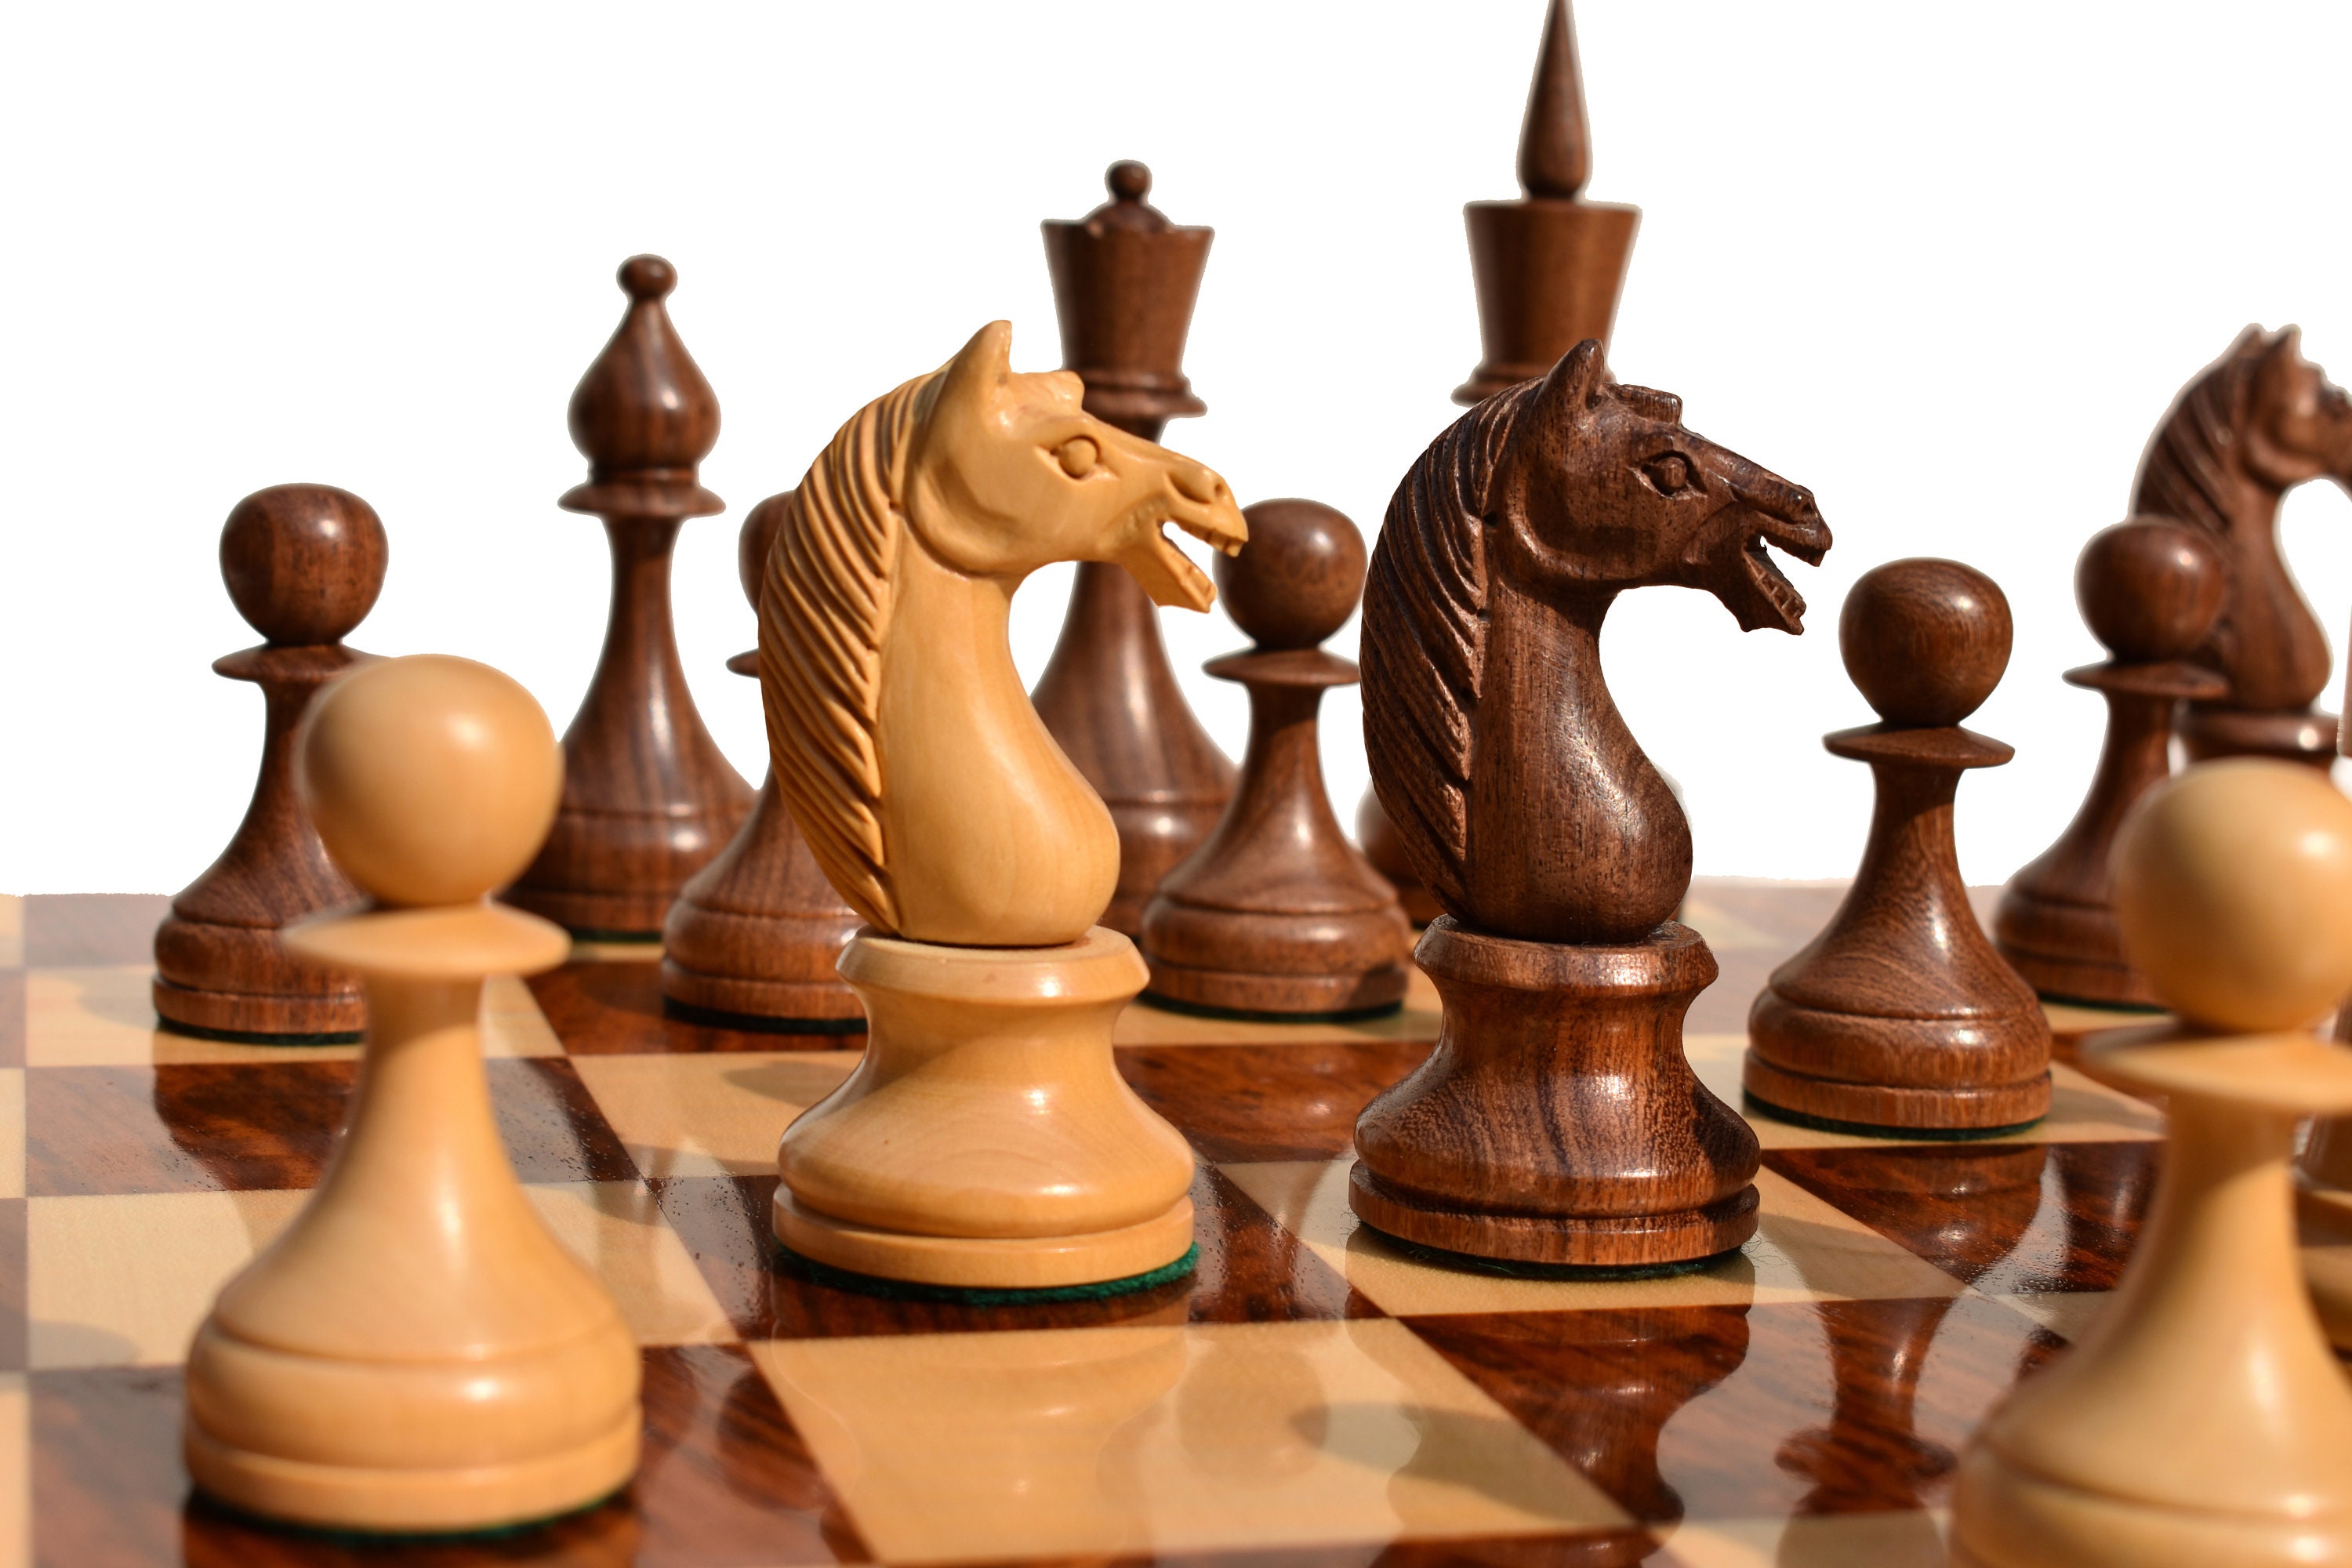  The Chess Empire-The French Lardy 3.75 Boxwood & Acacia  Staunton Wood Chess Pieces only Set : Toys & Games